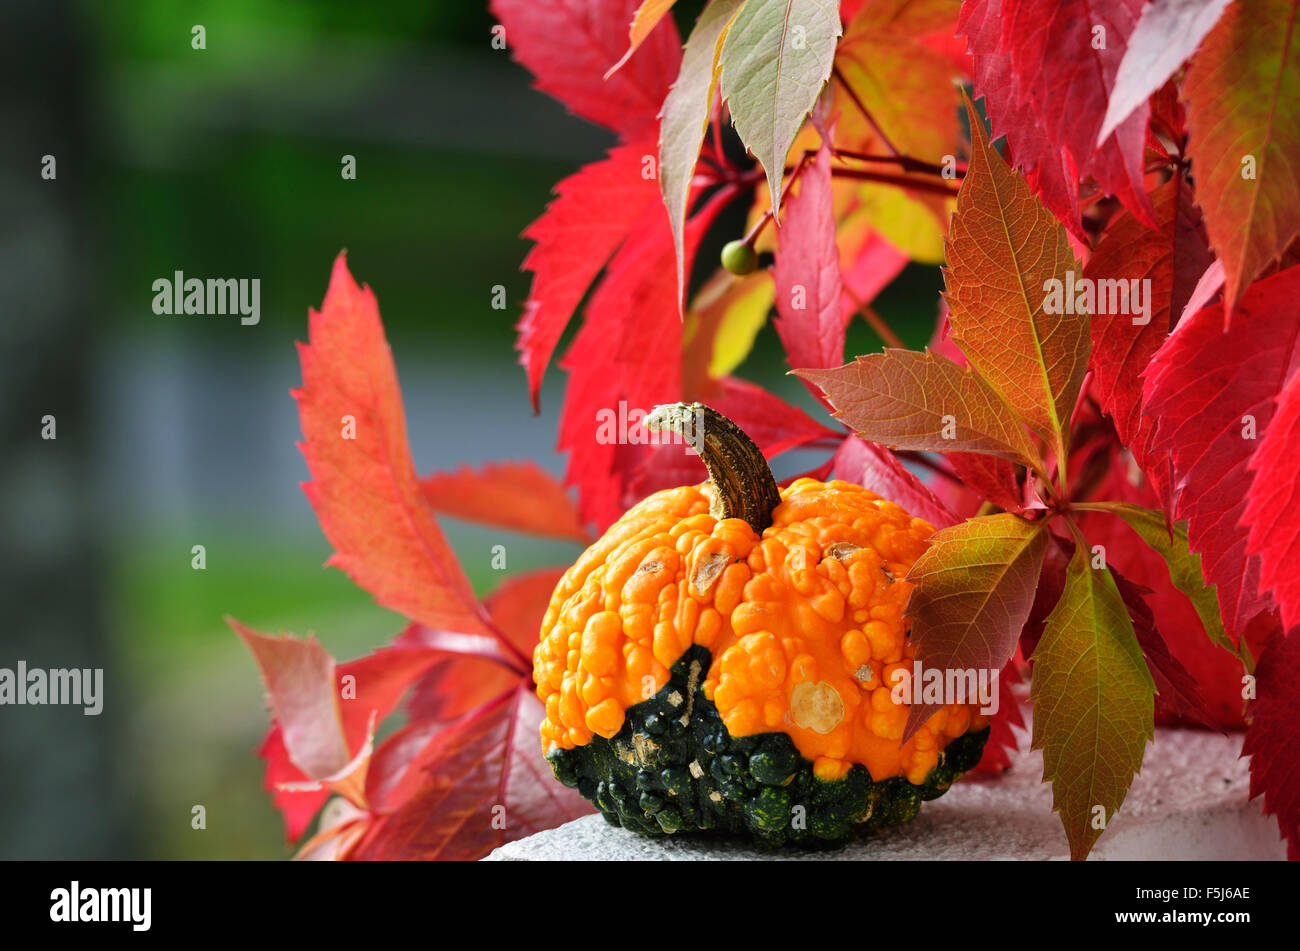 yellow green squash with pimples and rad leaves in autumn Stock Photo